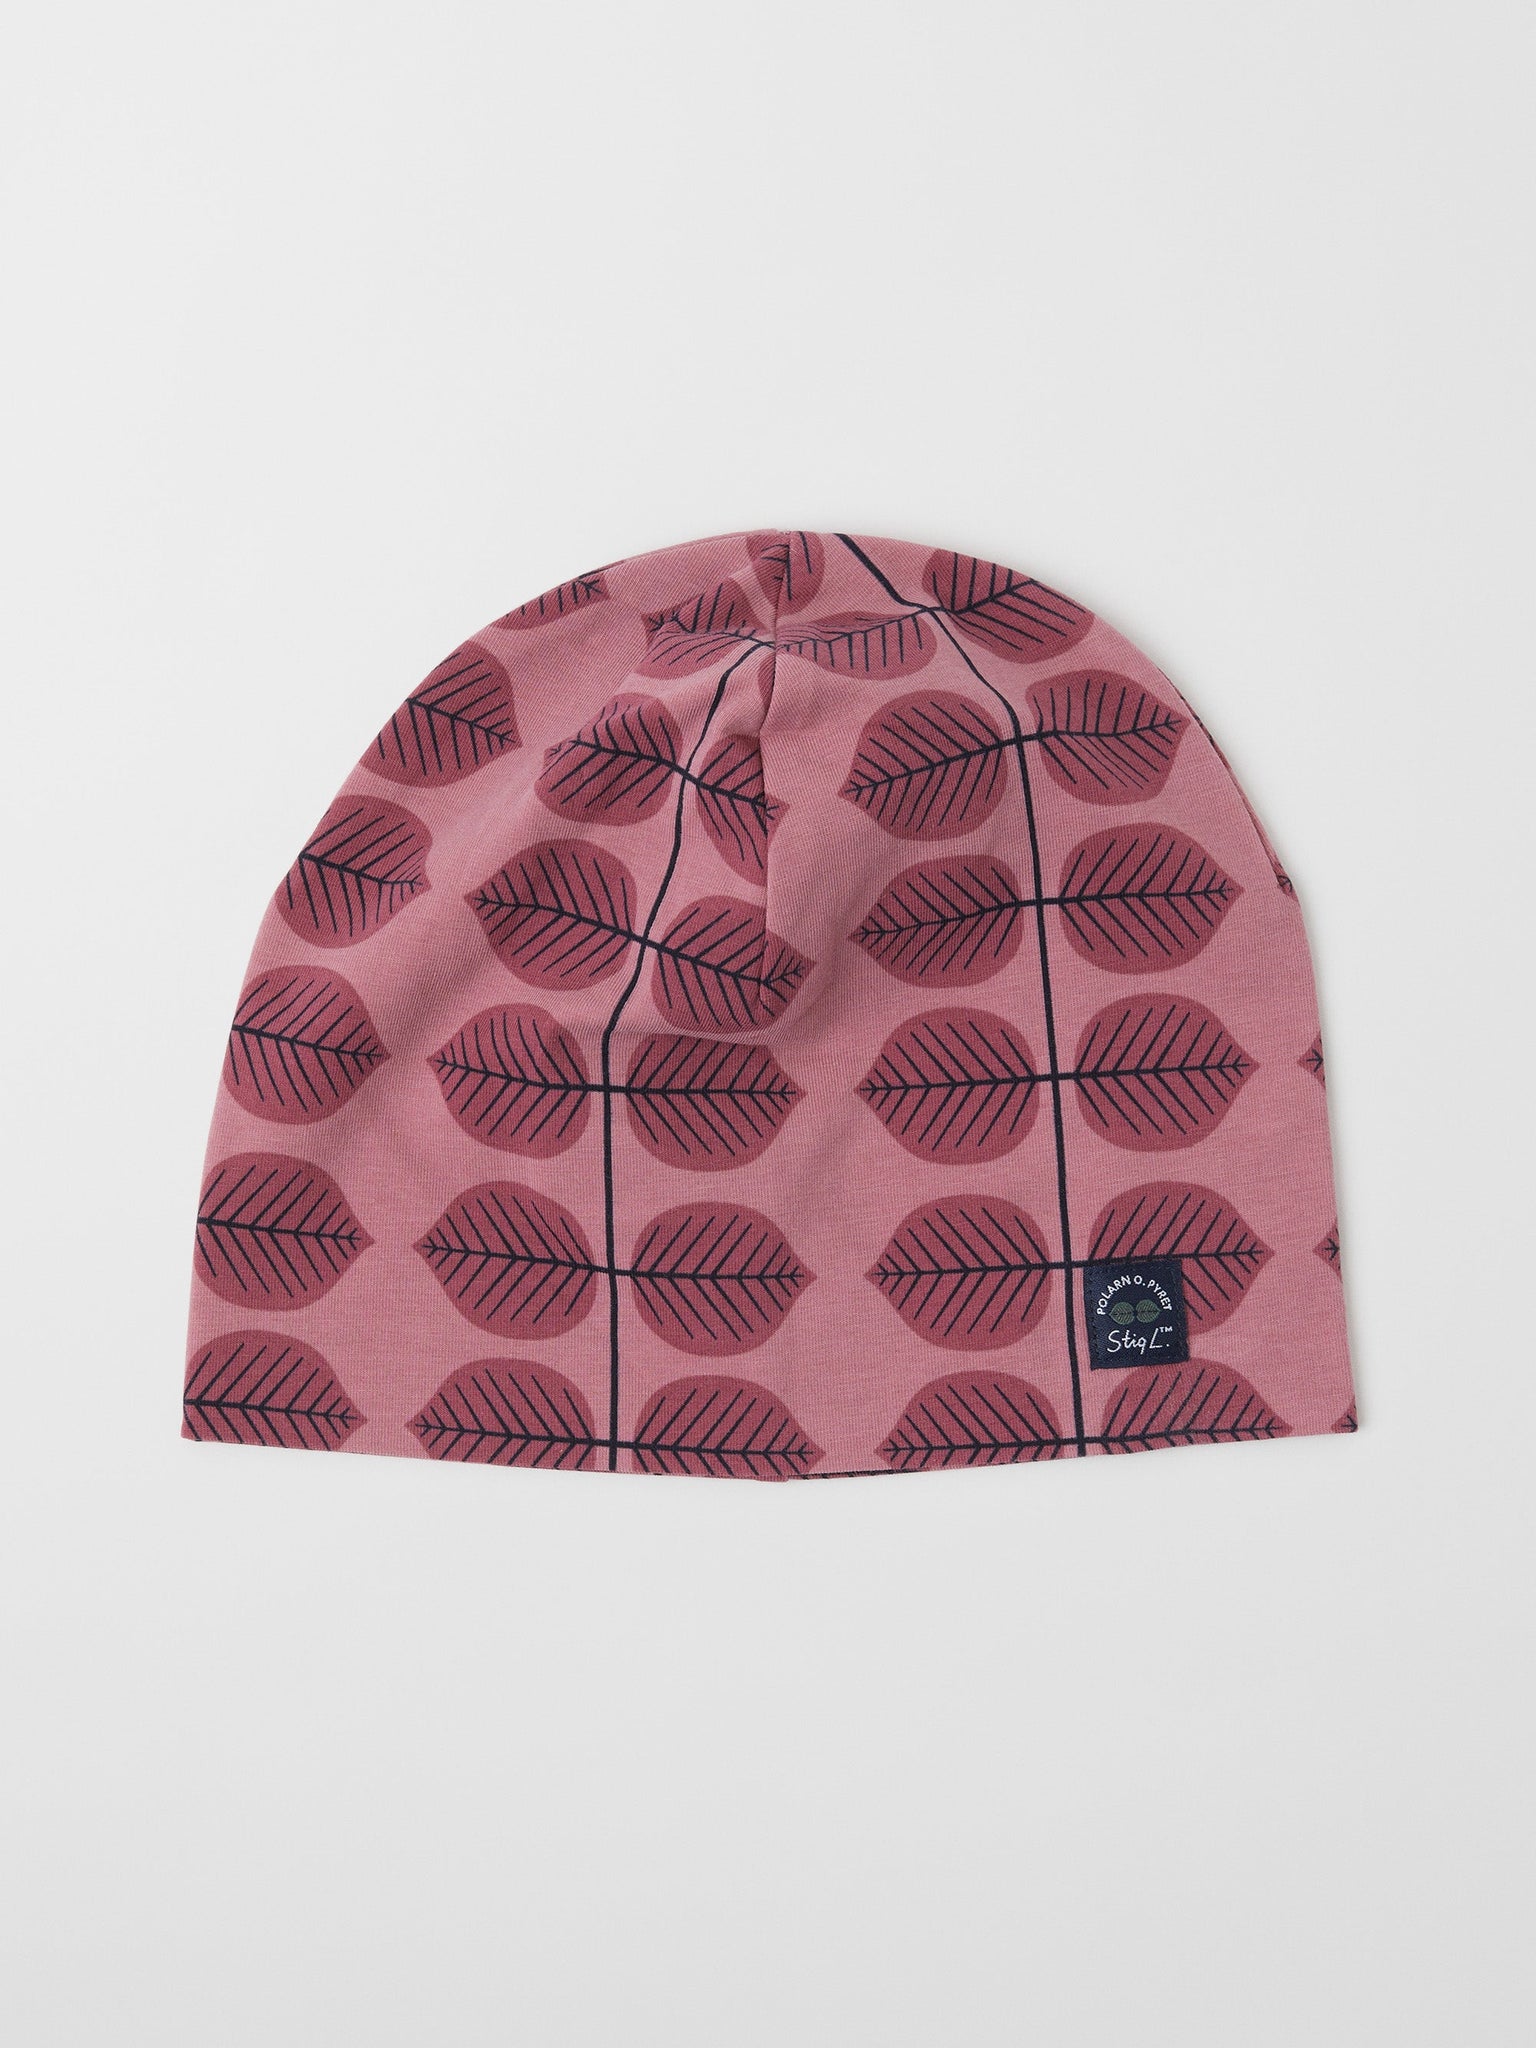 Nordic Pink Kids Beanie Hat from the Polarn O. Pyret outerwear collection. Made using ethically sourced materials.